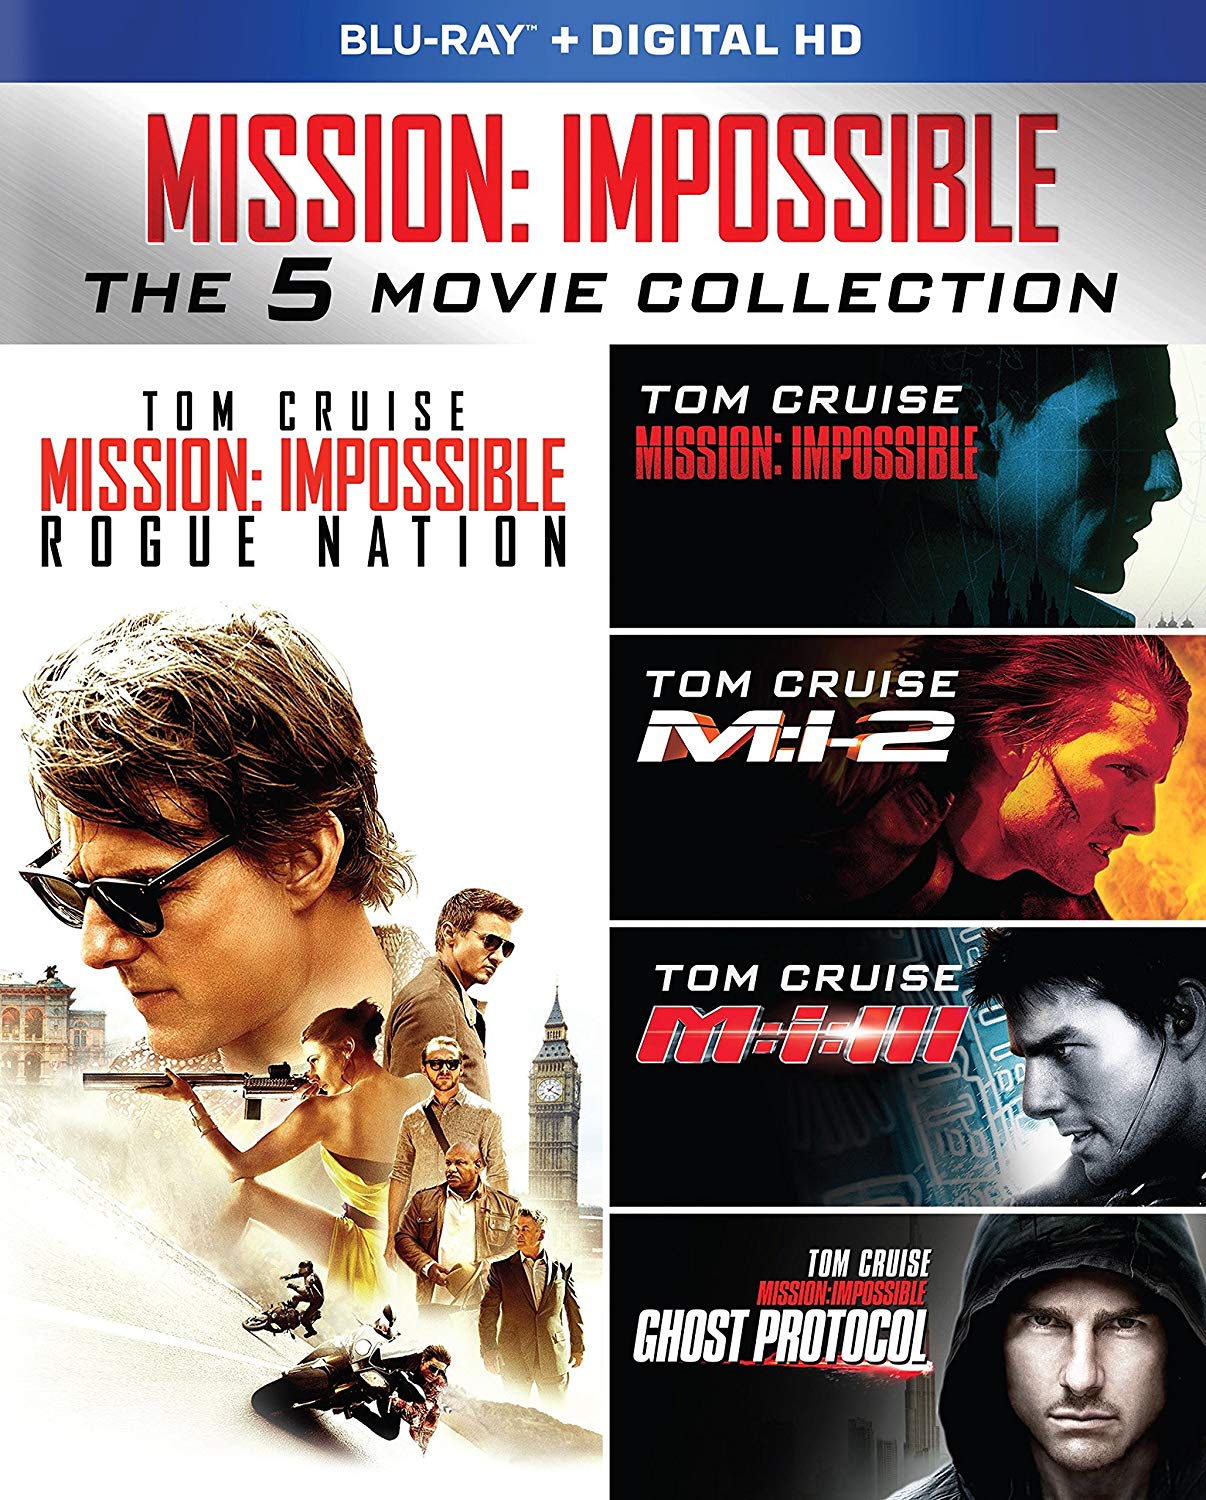 Mission impossible 3 movie online